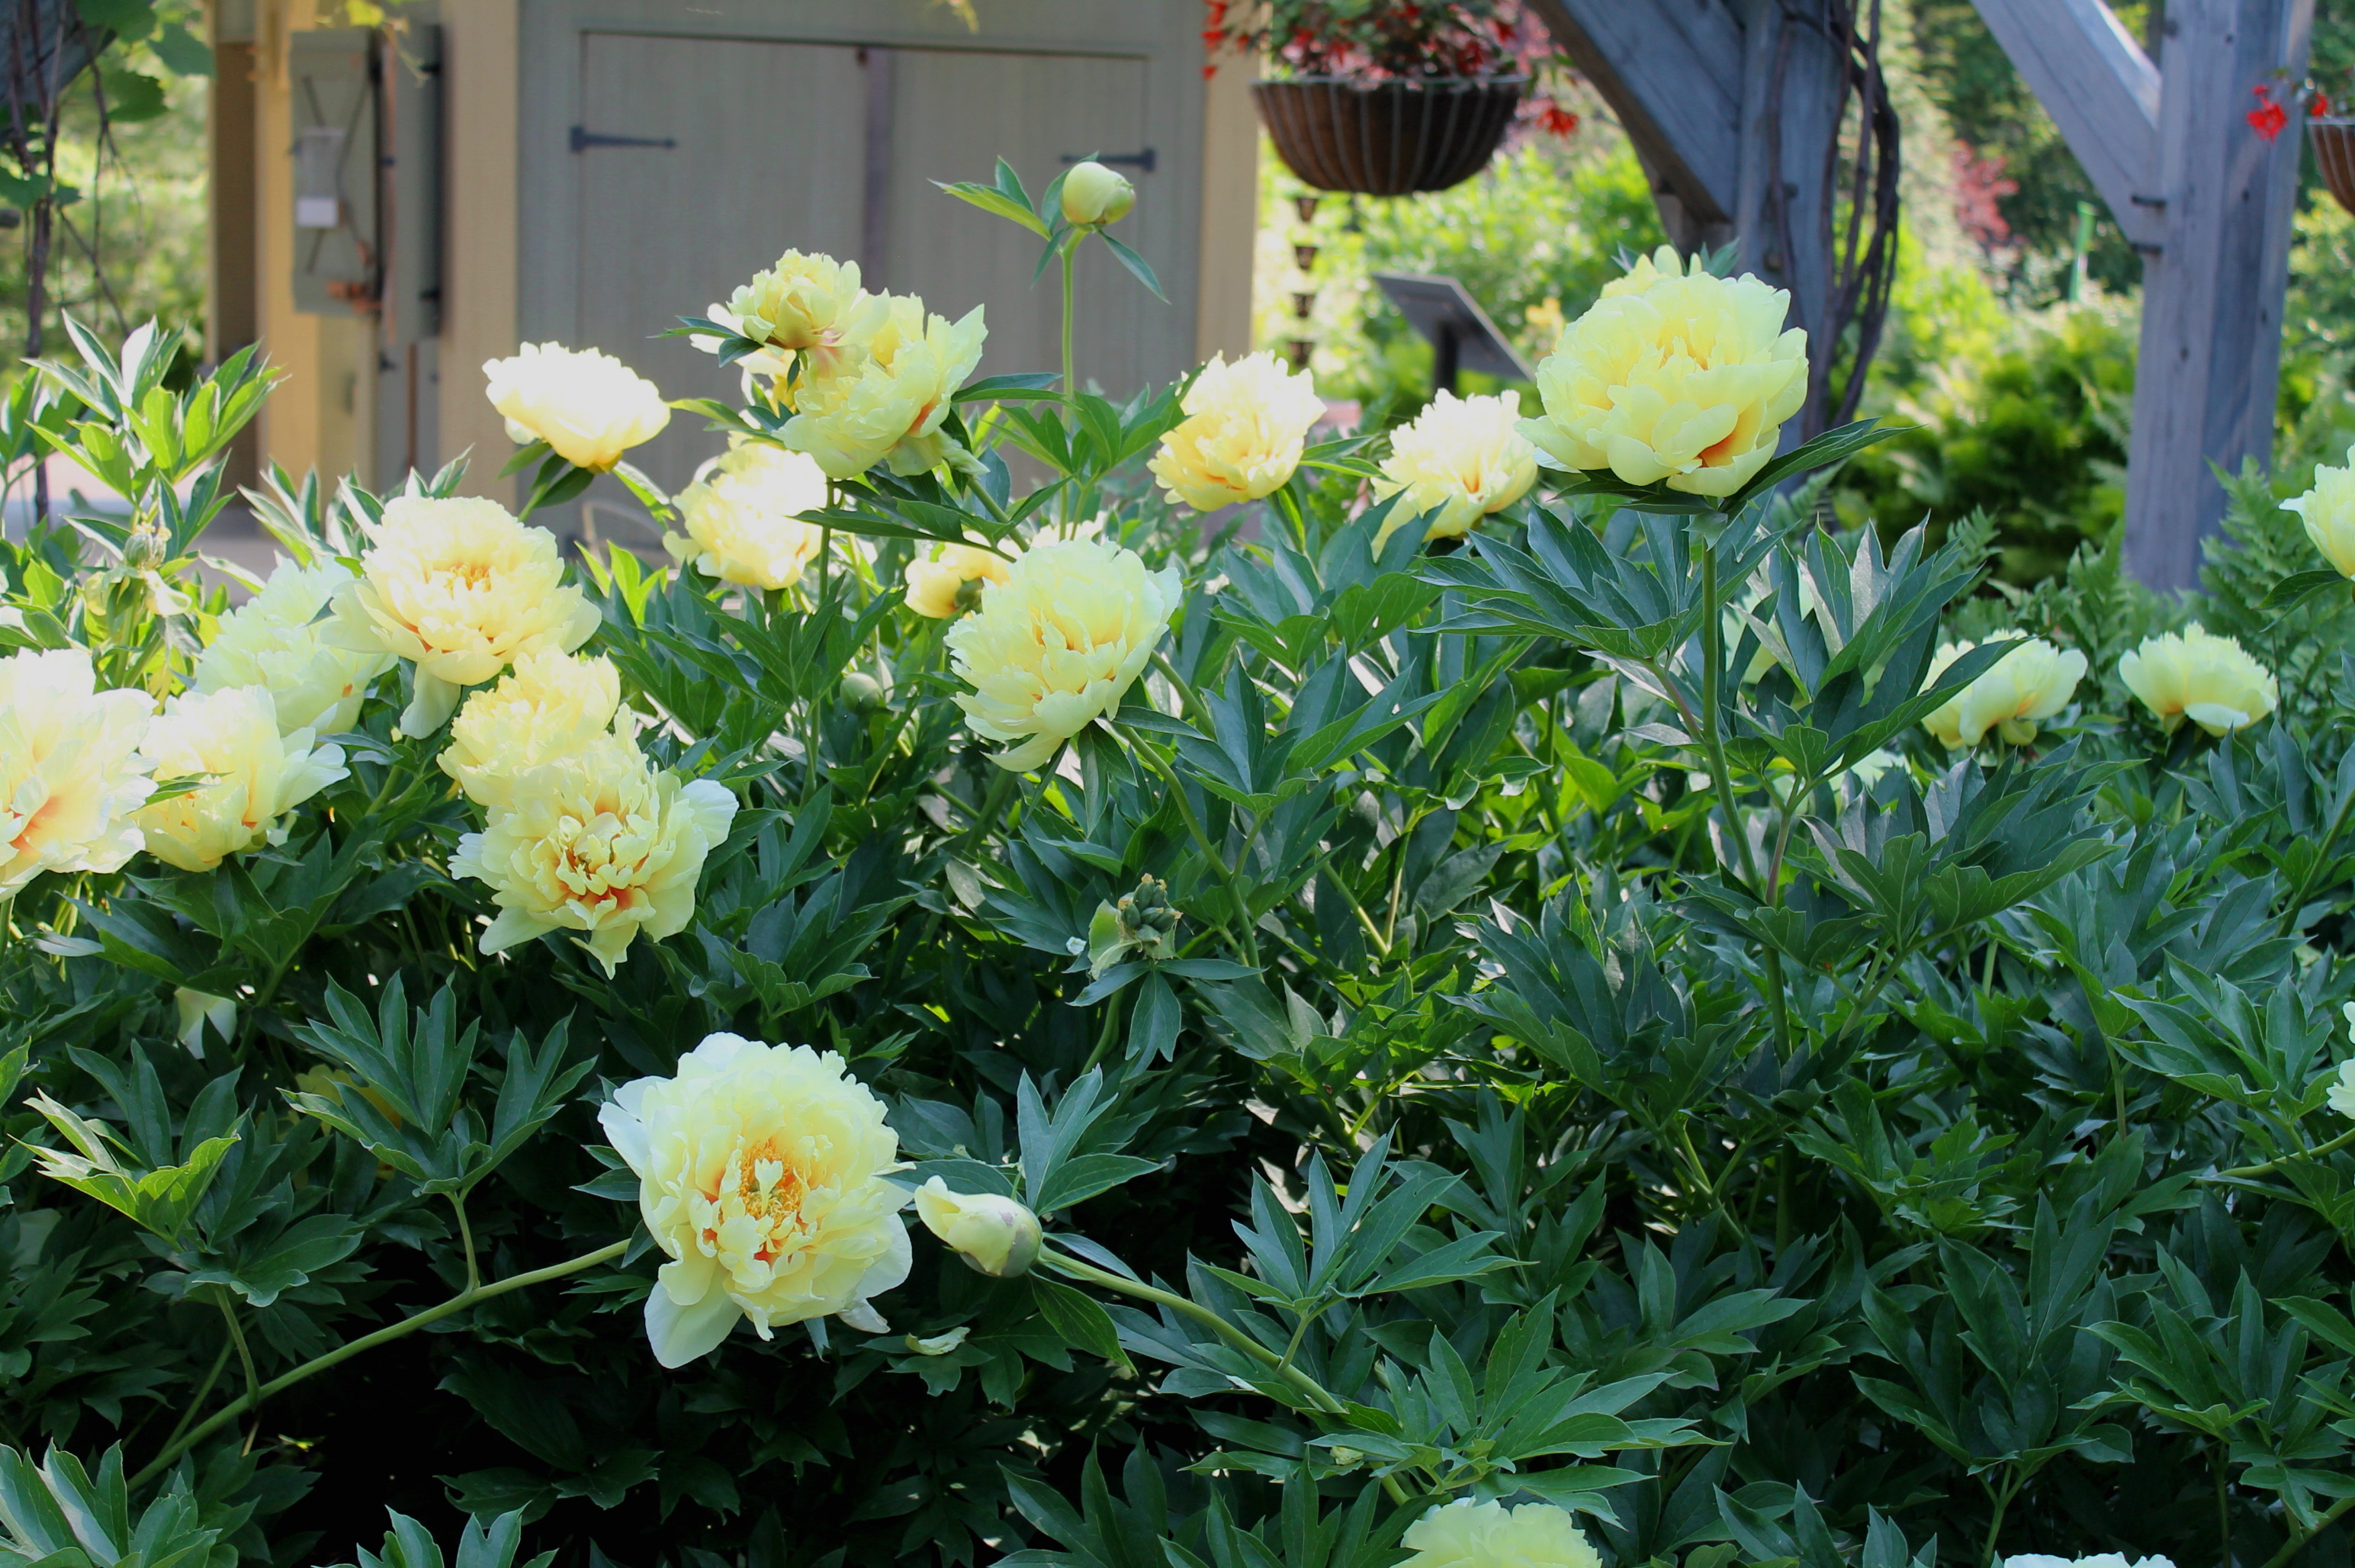 Details about   10x Peony Paeony Shrubs Flower Seeds 10 Types Plants Beautiful Home Garden Decor 